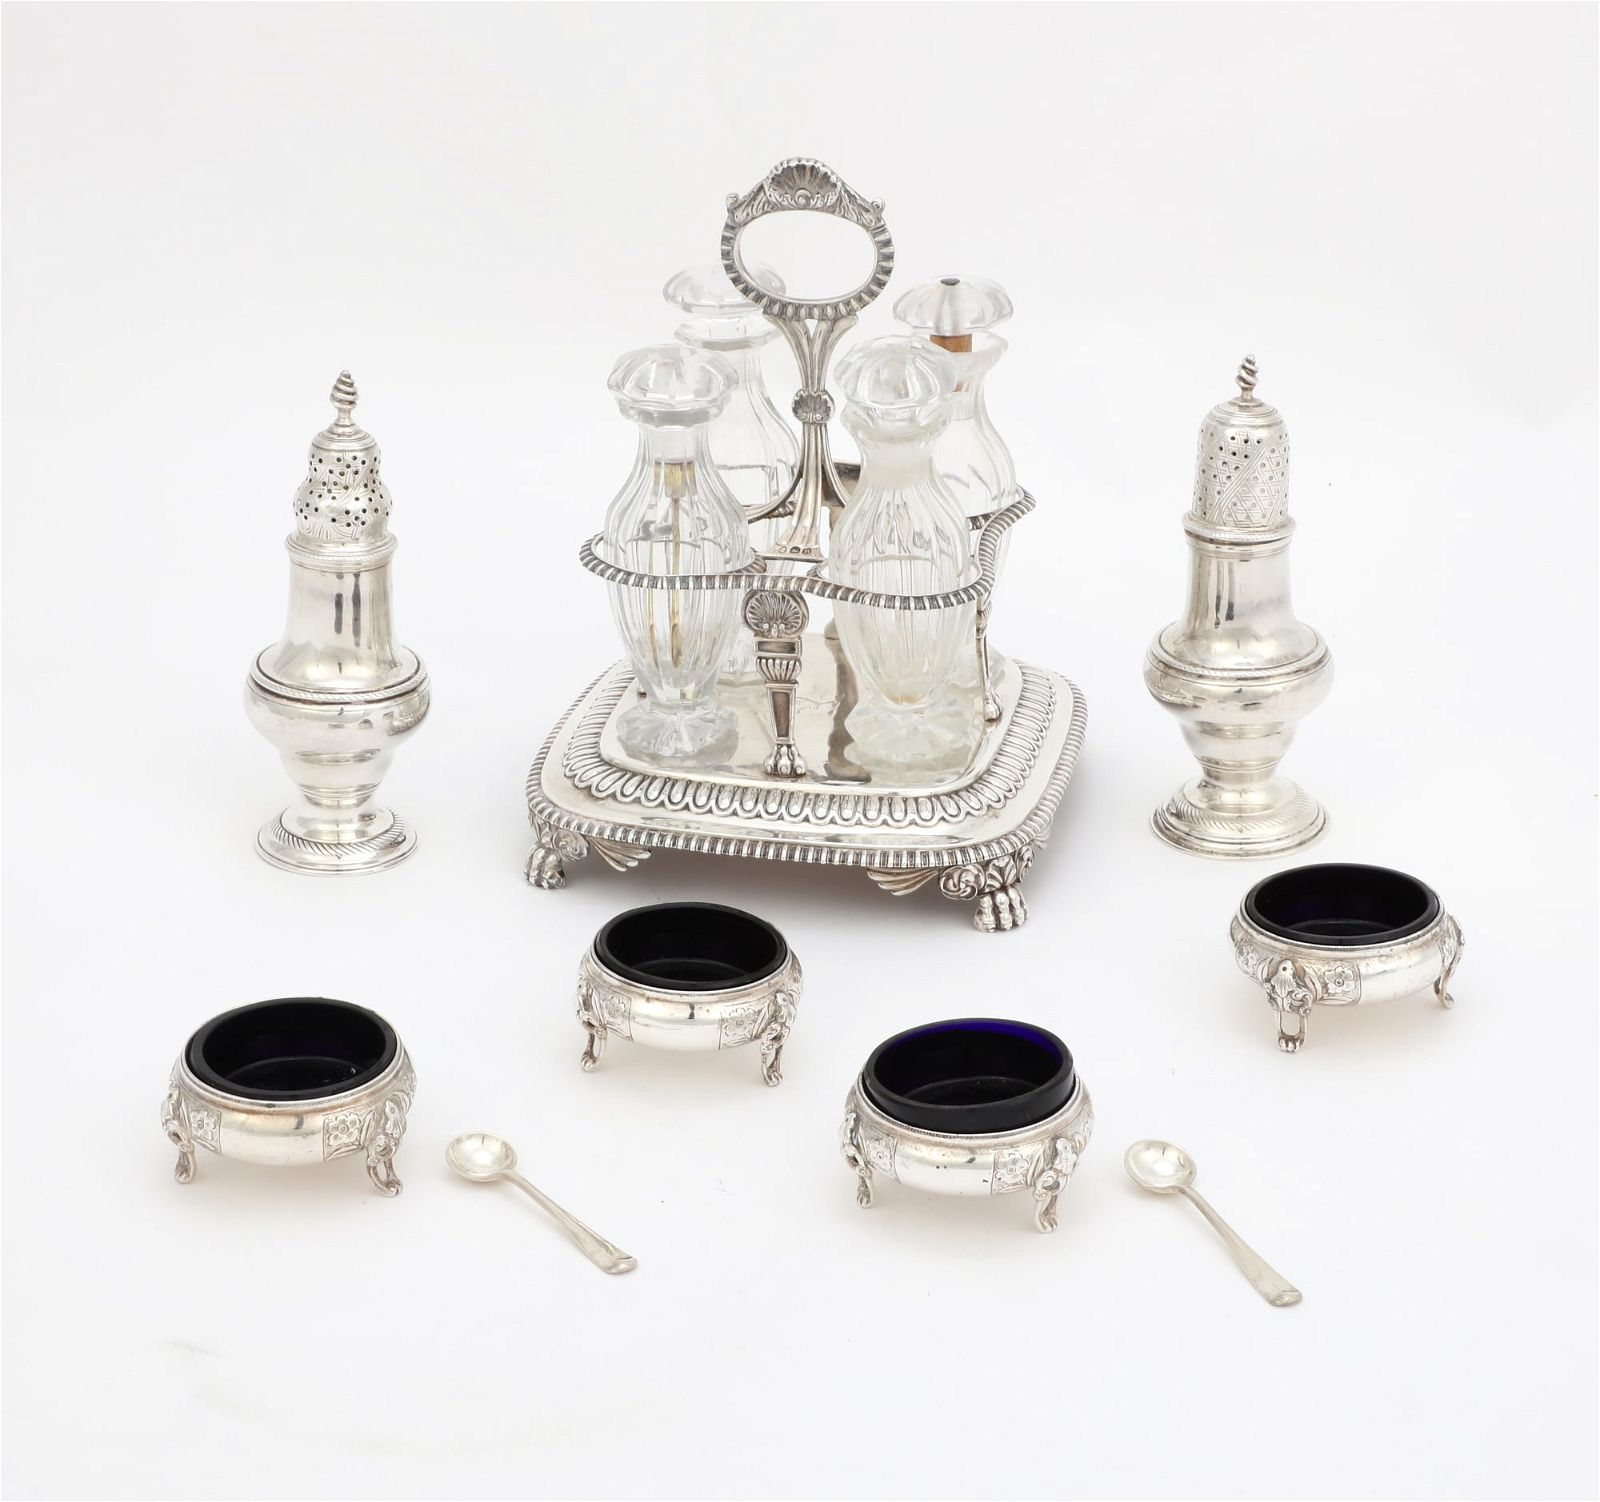 NINE PIECE GROUP OF ENGLISH SILVER